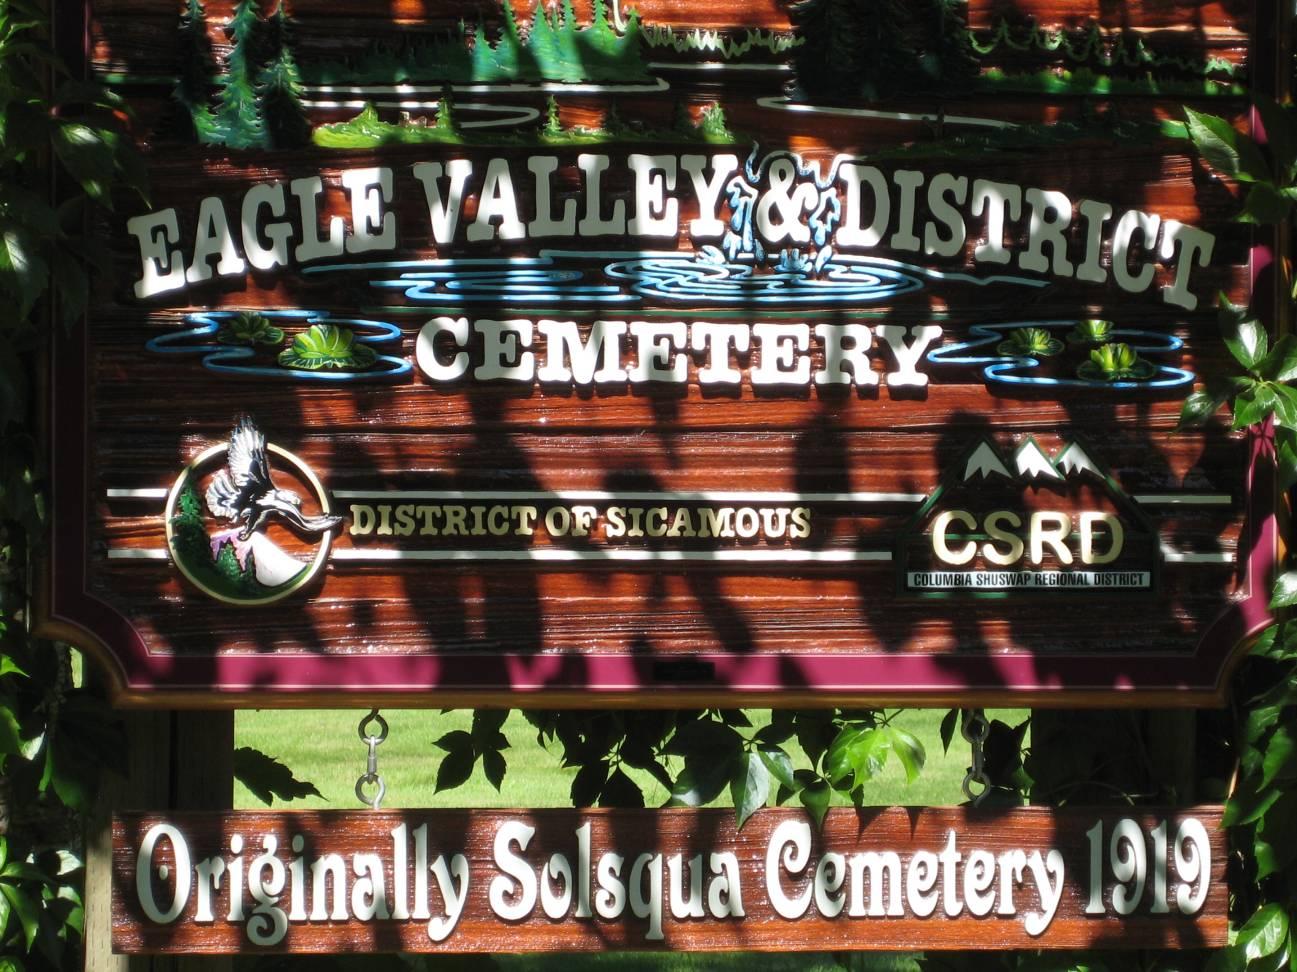 Entrance to Eagle Valley & District Cemetery